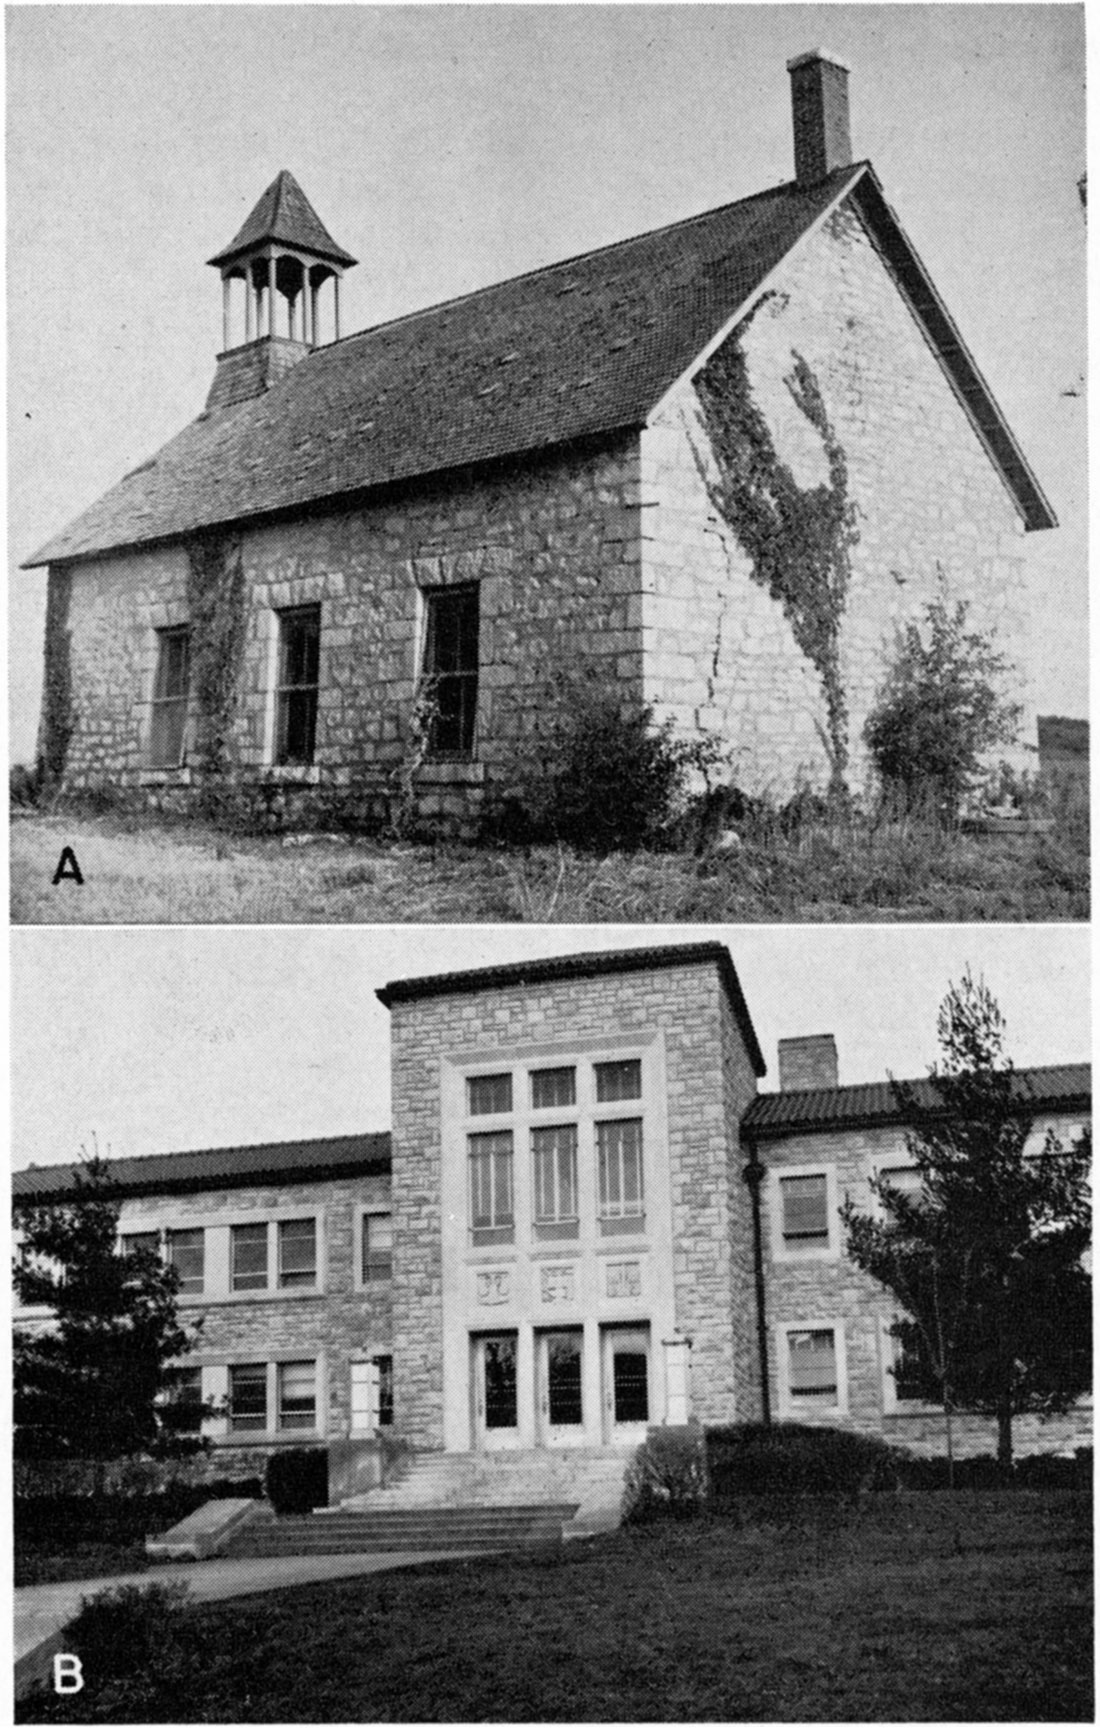 Two black and white photos; top is Rural school in sec. 16, T. 12 S., R 18 E., Douglas County, built of rough Toronto Limestone; bottom is Westerville Limestone (Kansas City oolite), Law Building, University of Kansas City, Missouri.